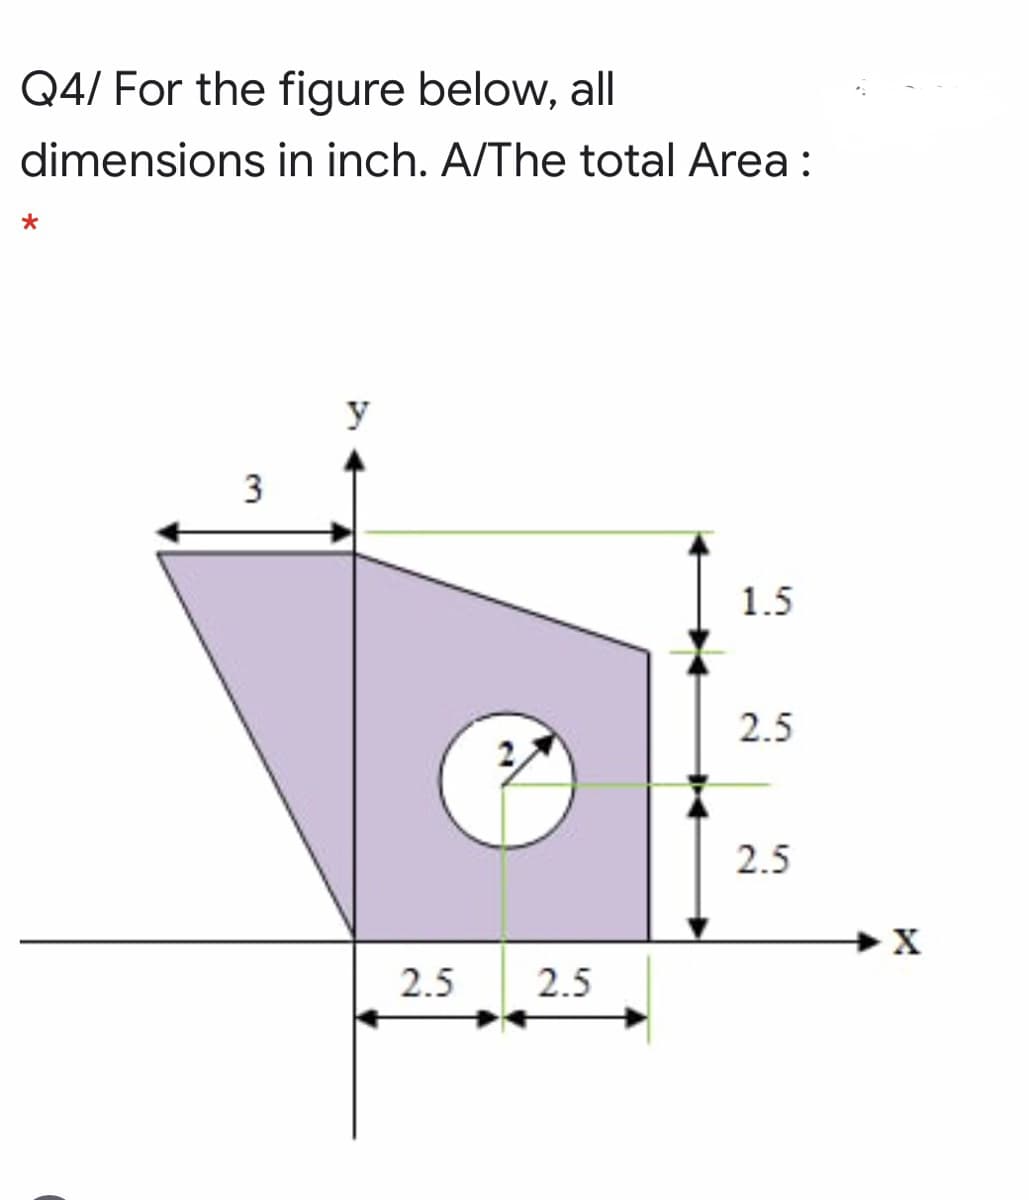 Q4/ For the figure below, all
dimensions in inch. A/The total Area :
y
1.5
2.5
2.5
2.5
2.5
3.
